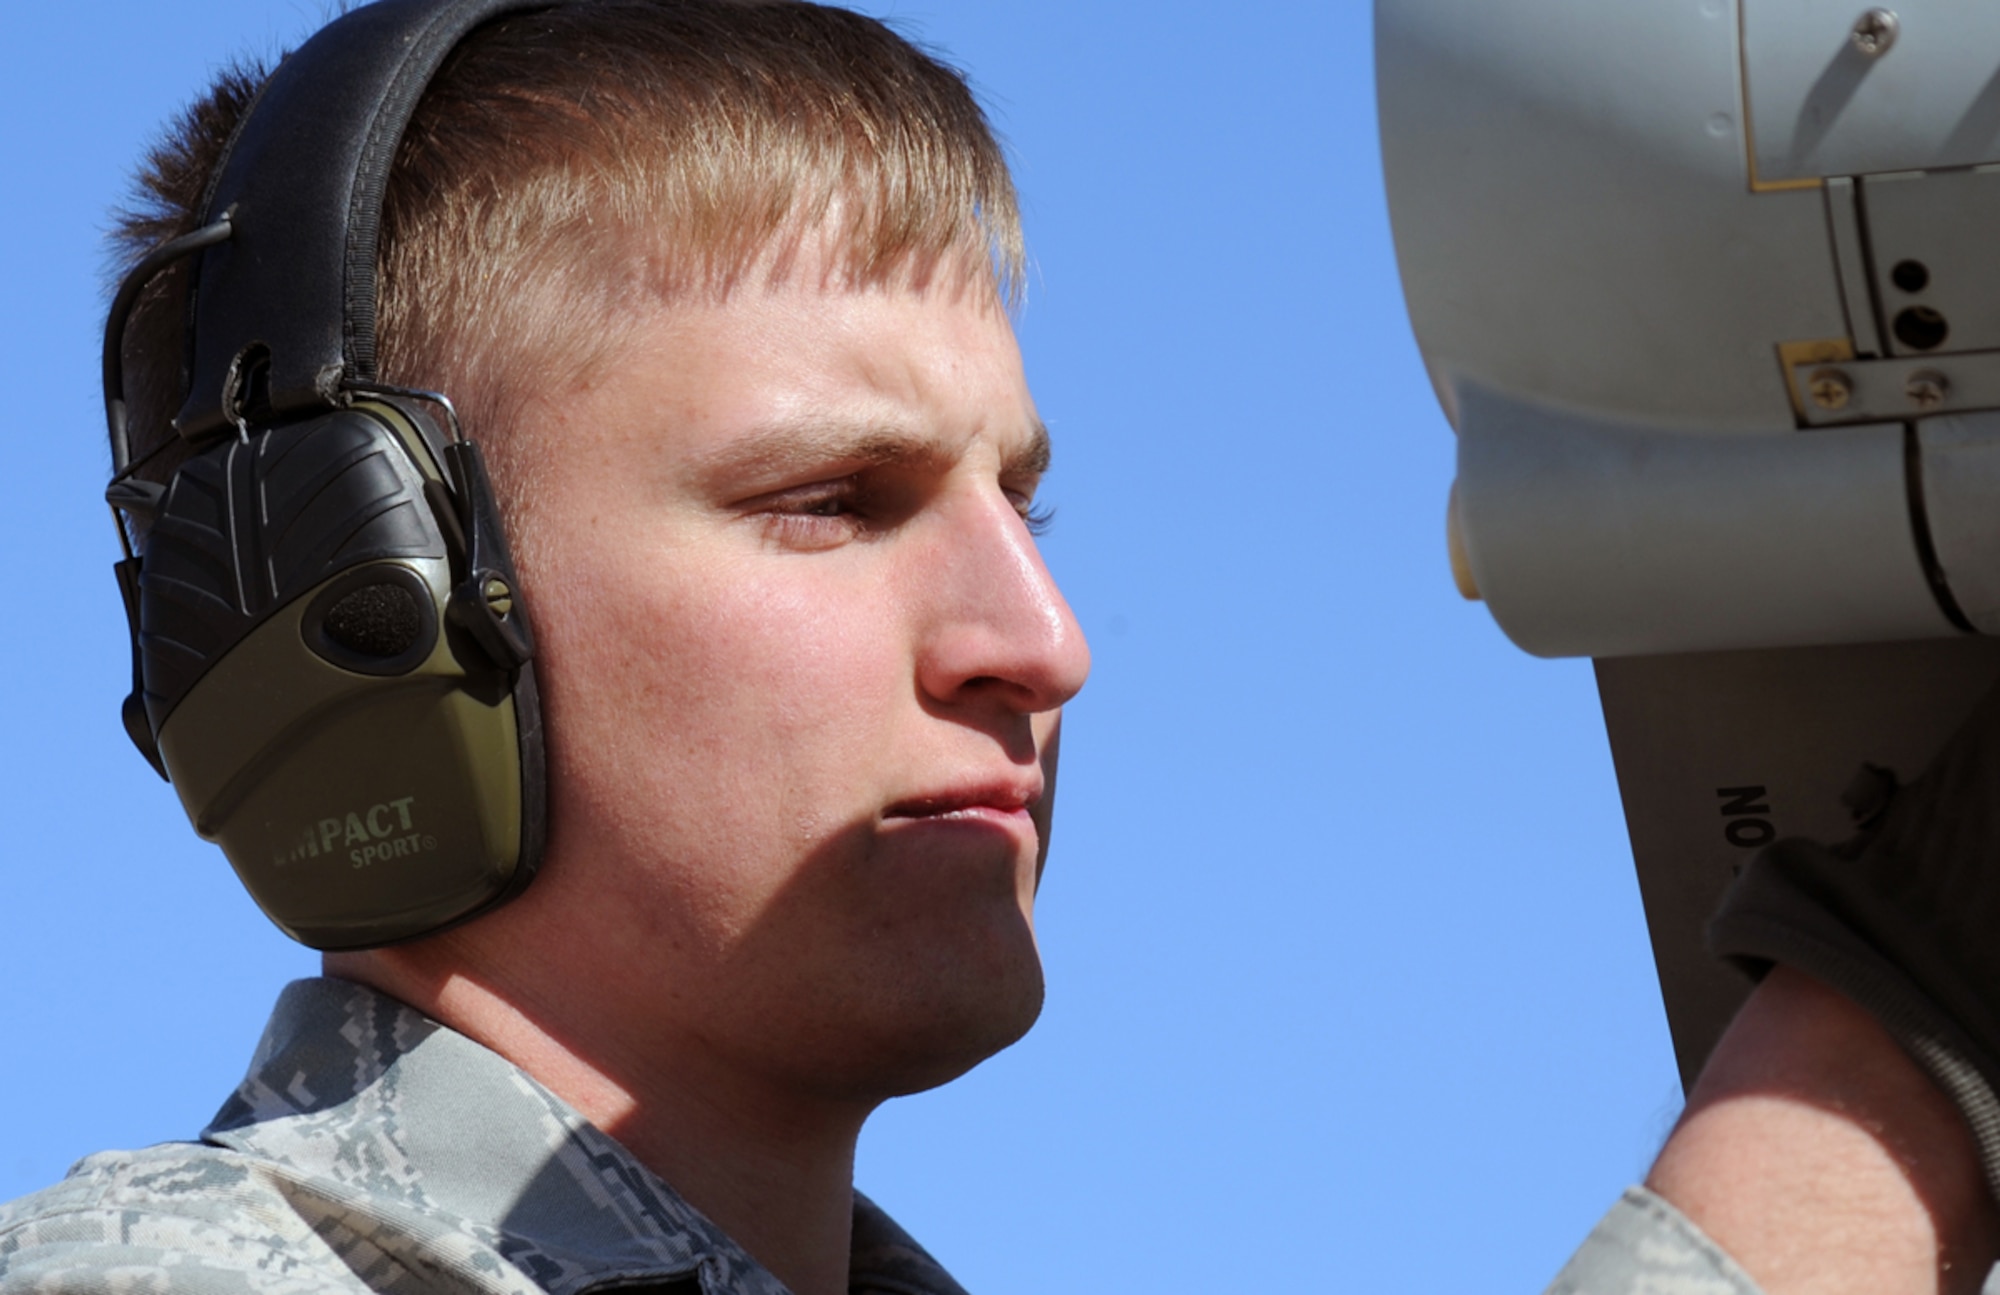 Senior Airman Taylor Bechtol, a member of the 90th Aircraft Maintenance Unit, works on the flightline during a Weapon Systems Evaluation Program at Tyndall Air Force Base, Fla. March 26, 2014. The 90th AMU, from Joint Base Elmendorf-Richardson, Alaska, had their people, equipment and procedures validated at Tyndall Air Force Base. (U.S. Air Force photo/Master Sgt. Scott Wilcox)